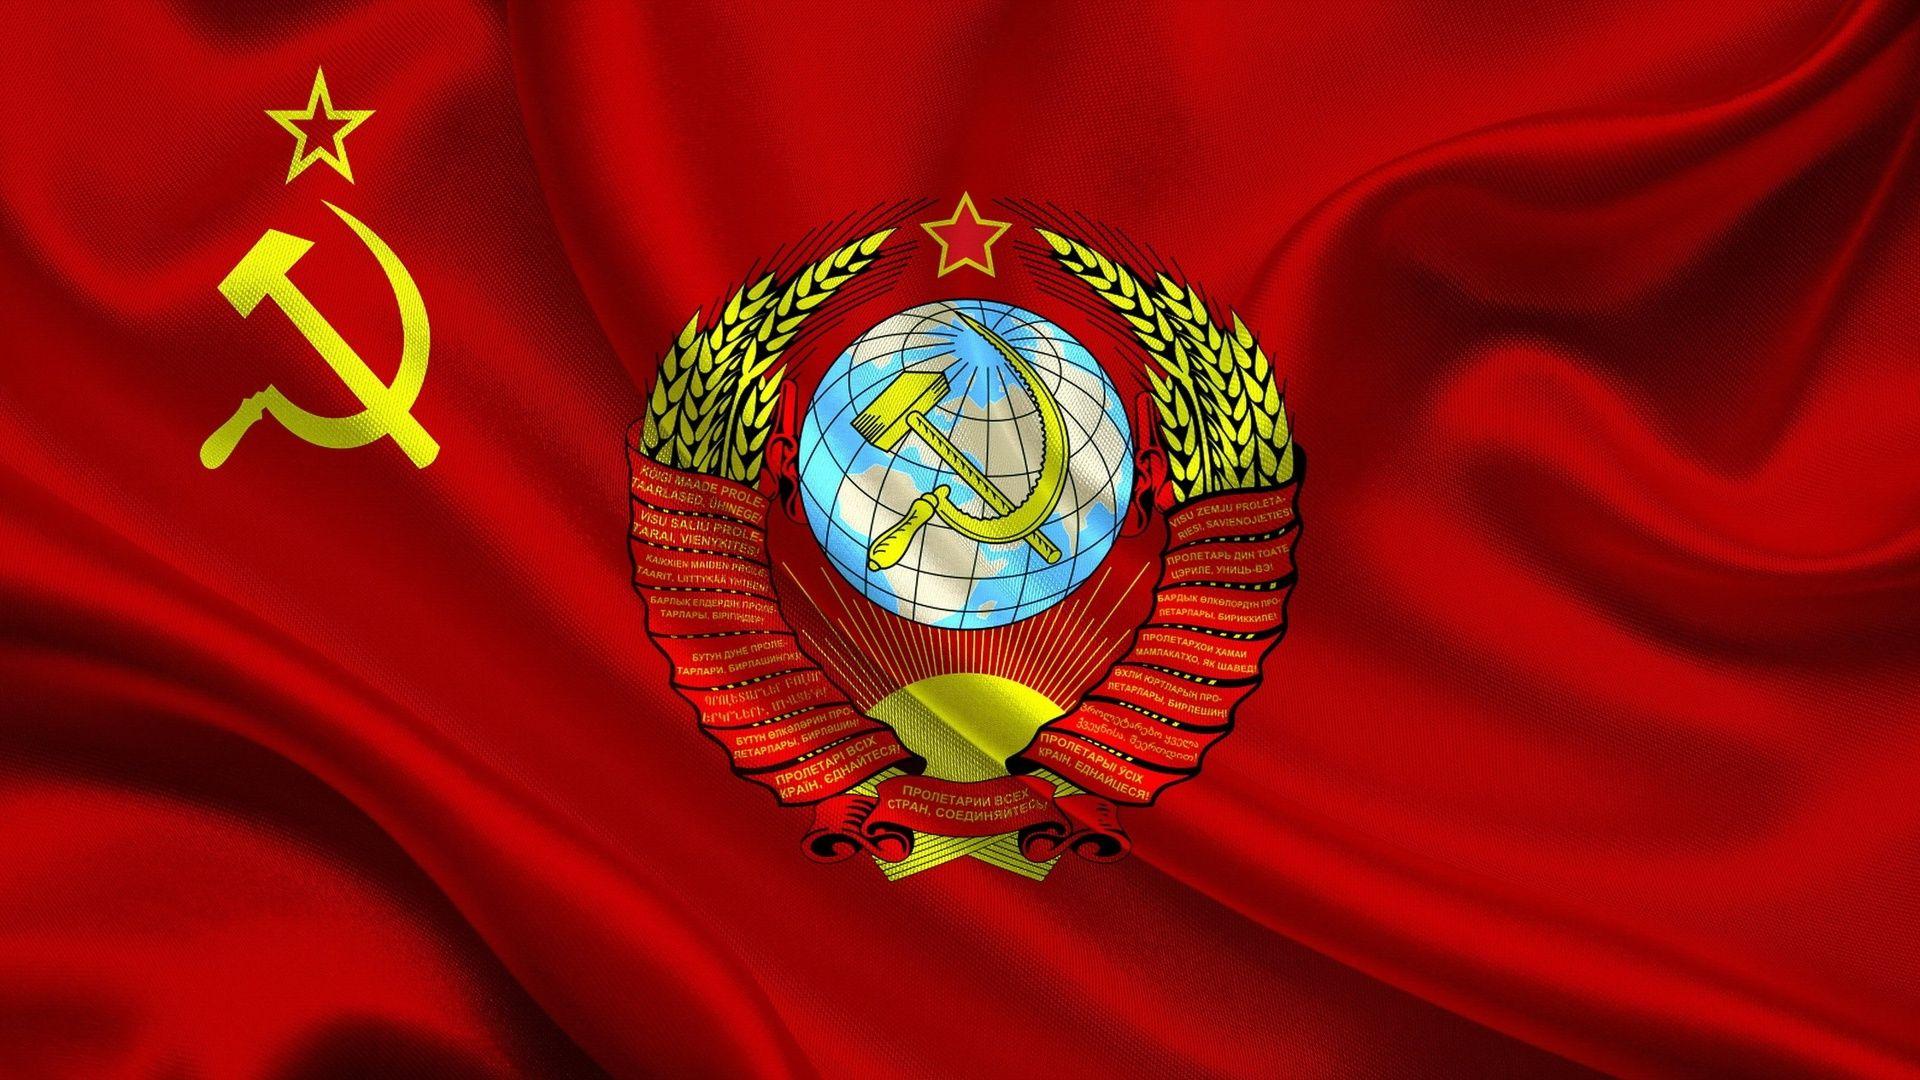 Flag, Flags, Flags Of Ussr, Ussr Flag Wallpaper